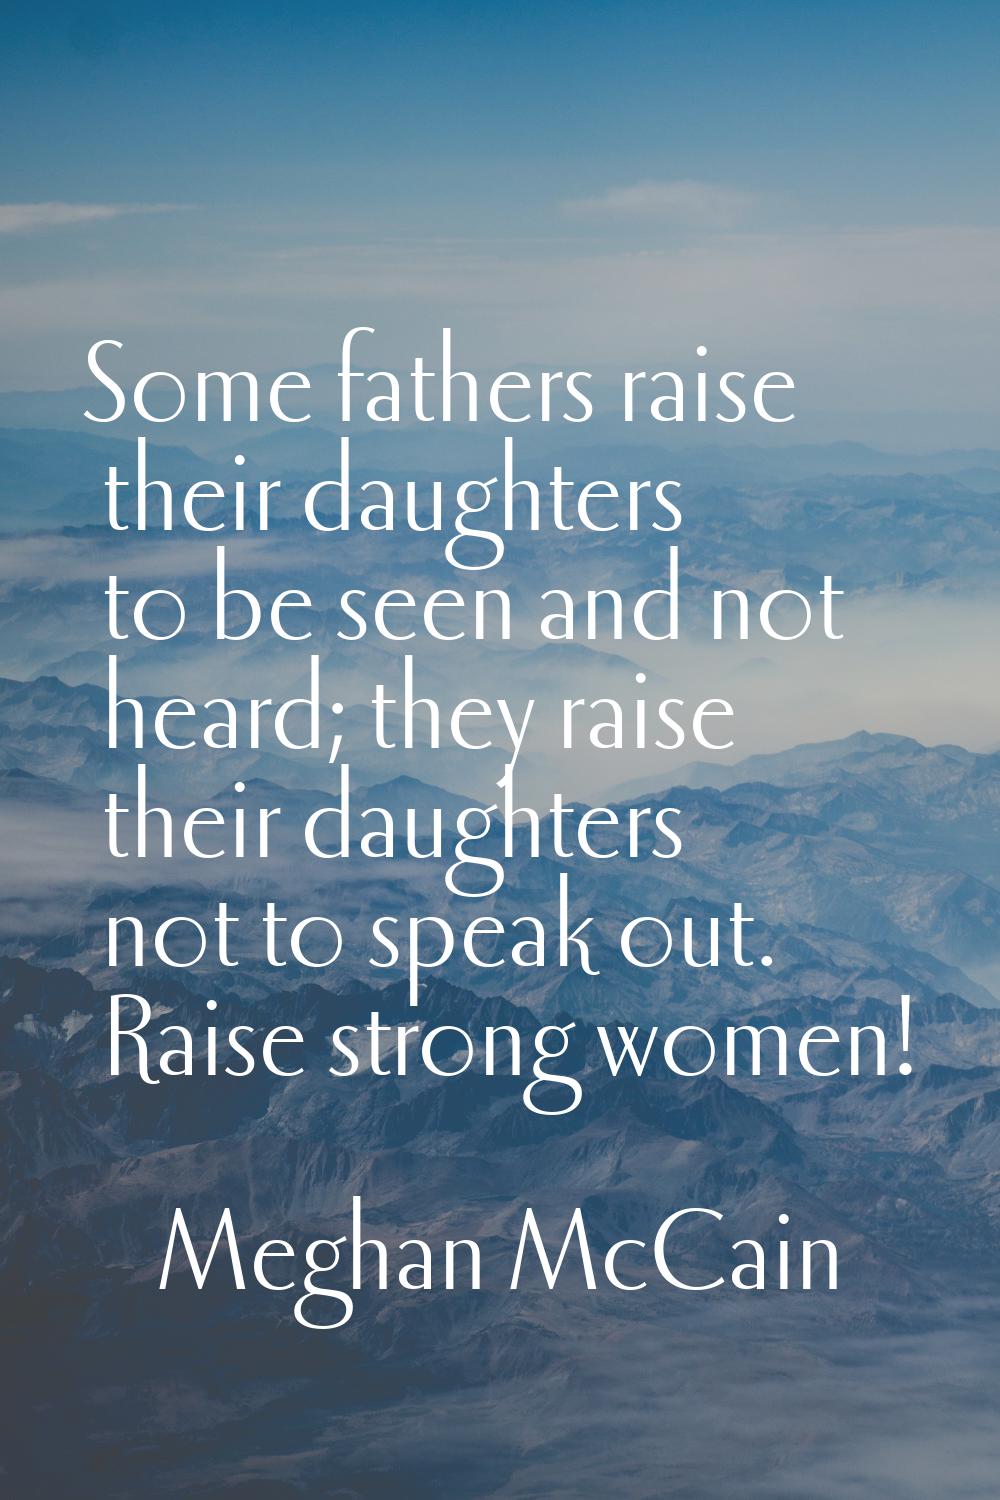 Some fathers raise their daughters to be seen and not heard; they raise their daughters not to spea